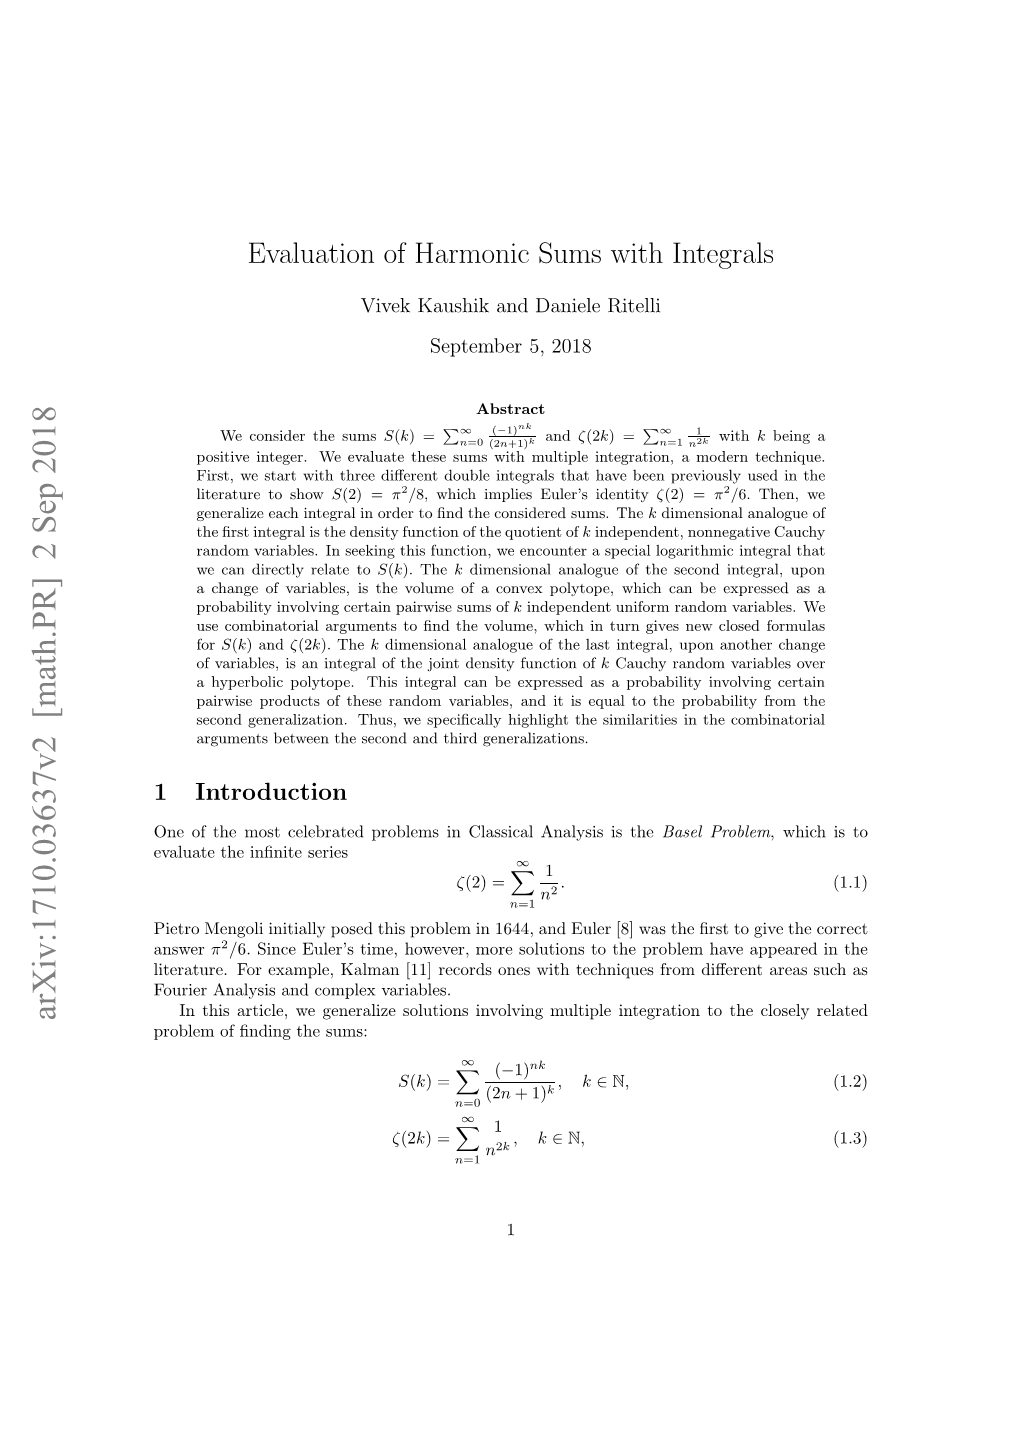 Evaluation of Harmonic Sums with Integrals